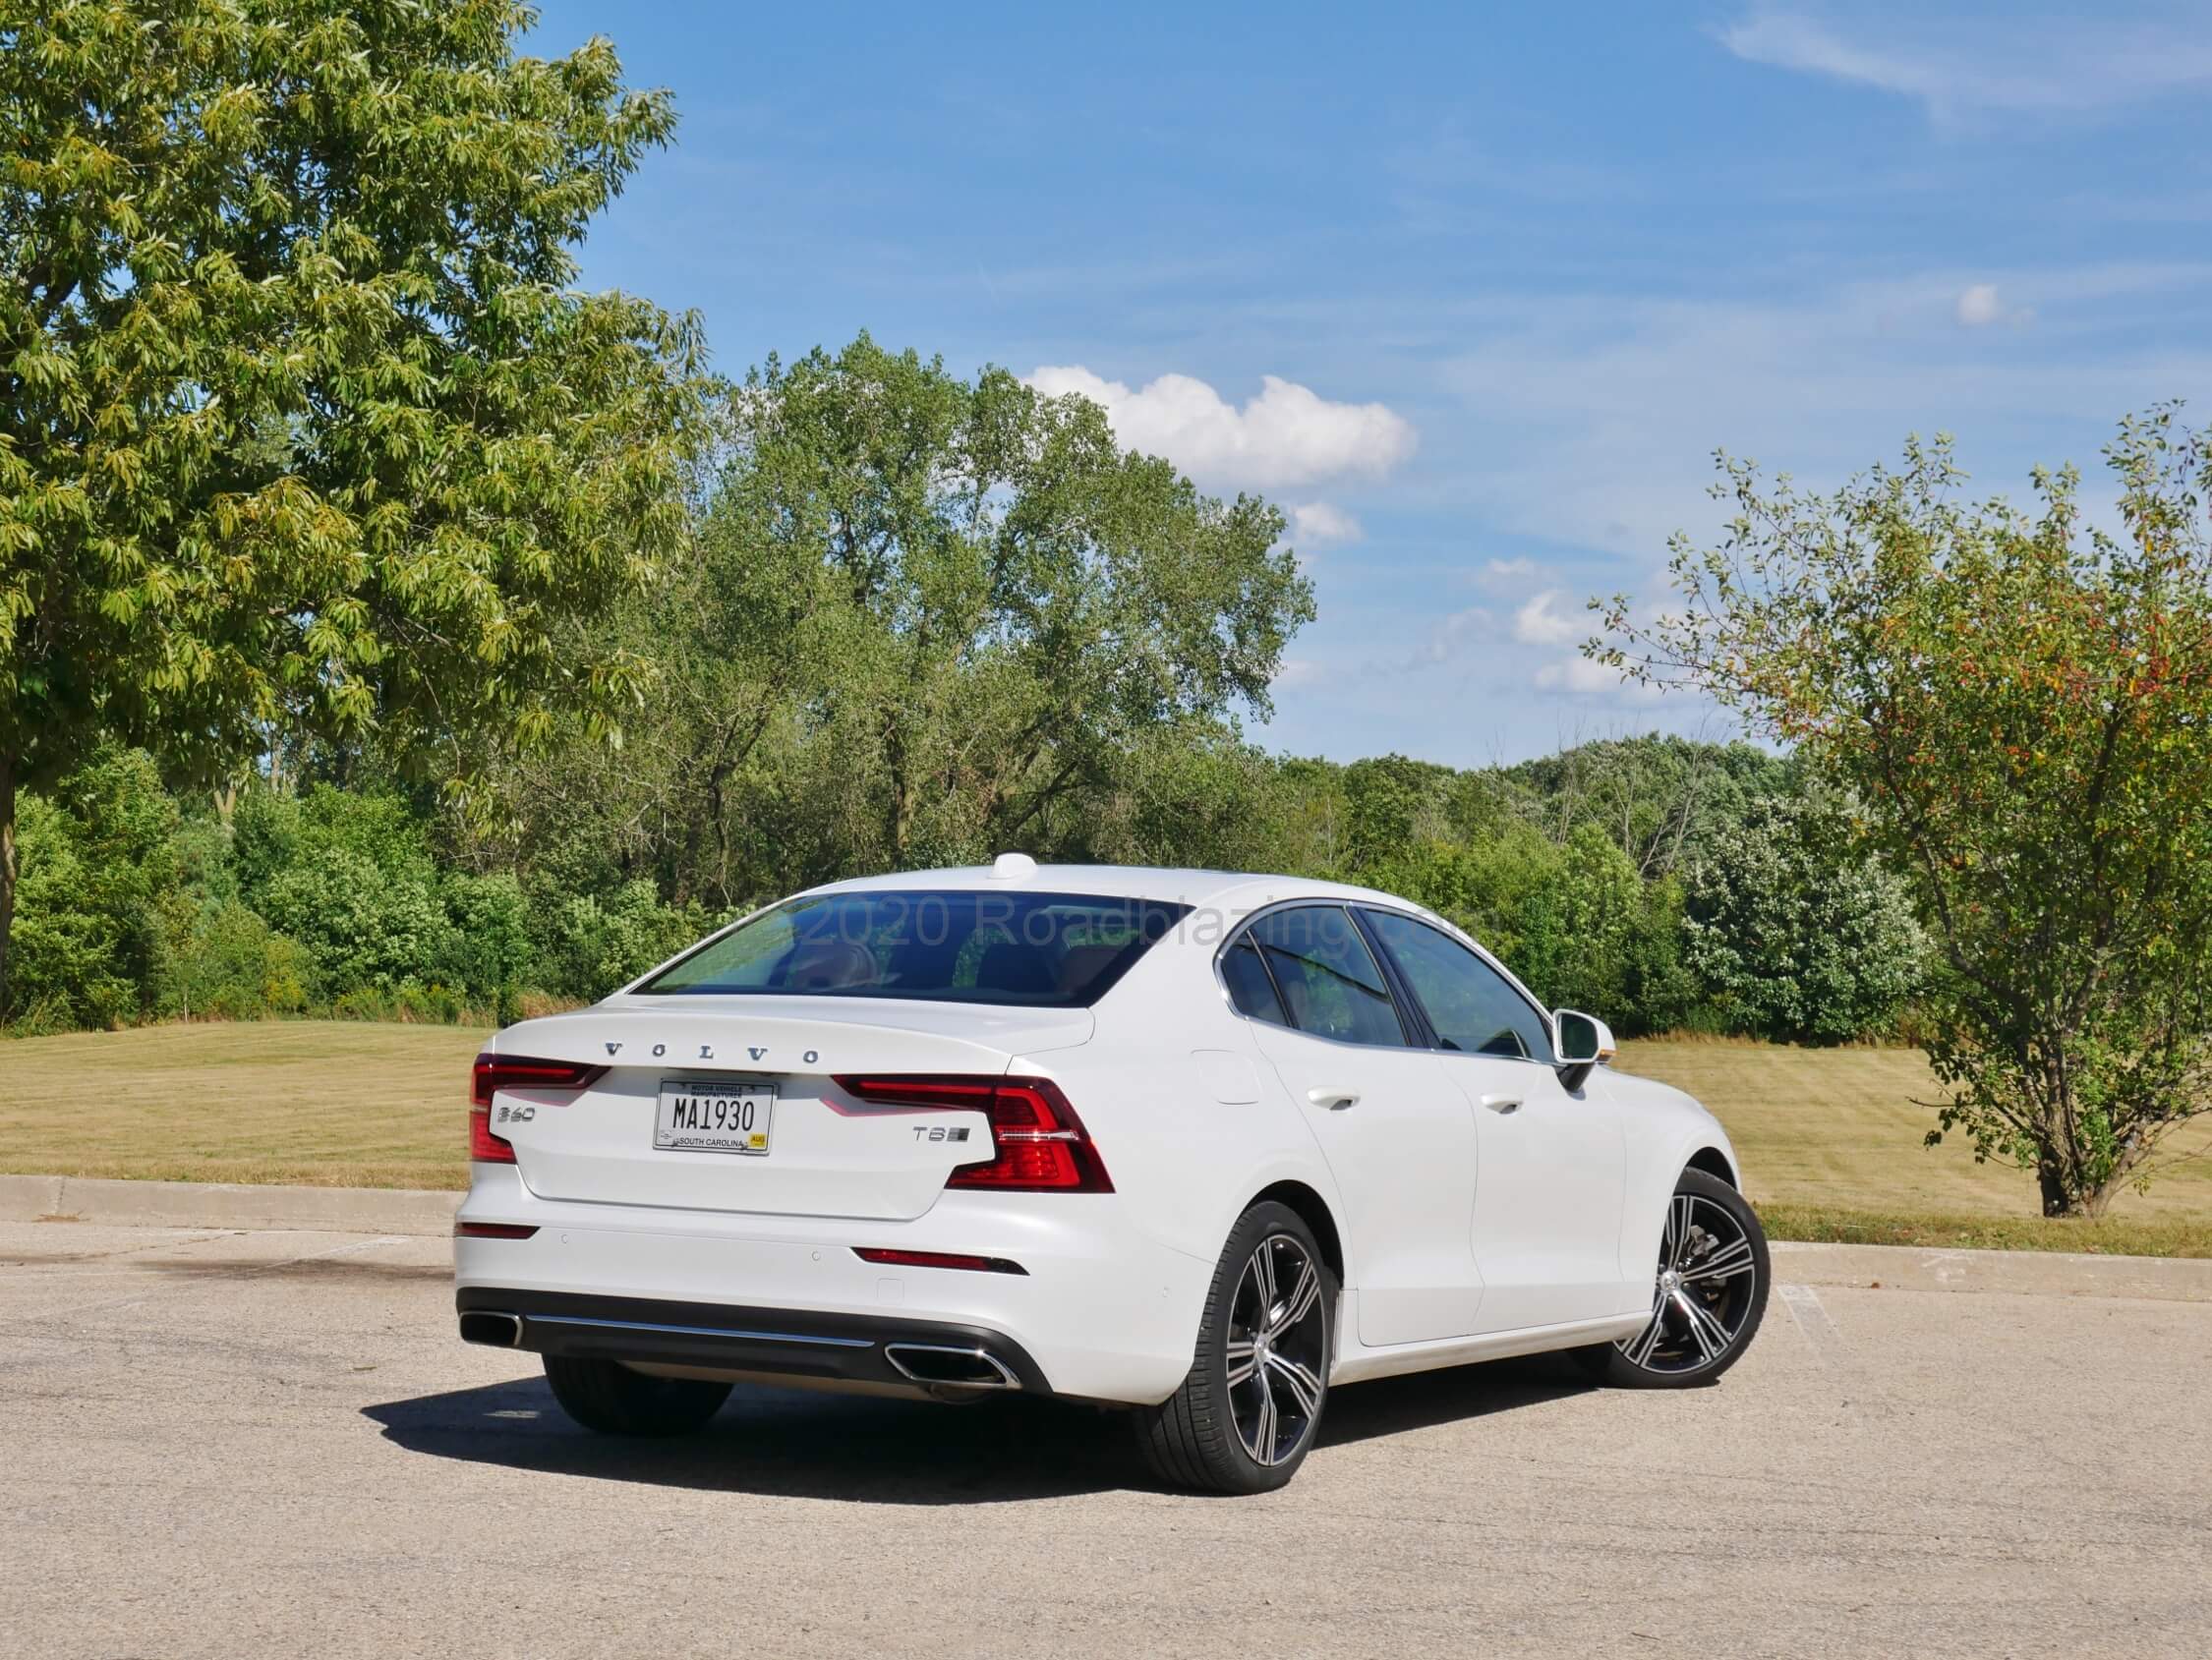 2020 Volvo S60 T8 AWD PHEV: Inboard boomerang LED taillamps and darkened lower rear diffuser sharpen this sporty prestige sedan